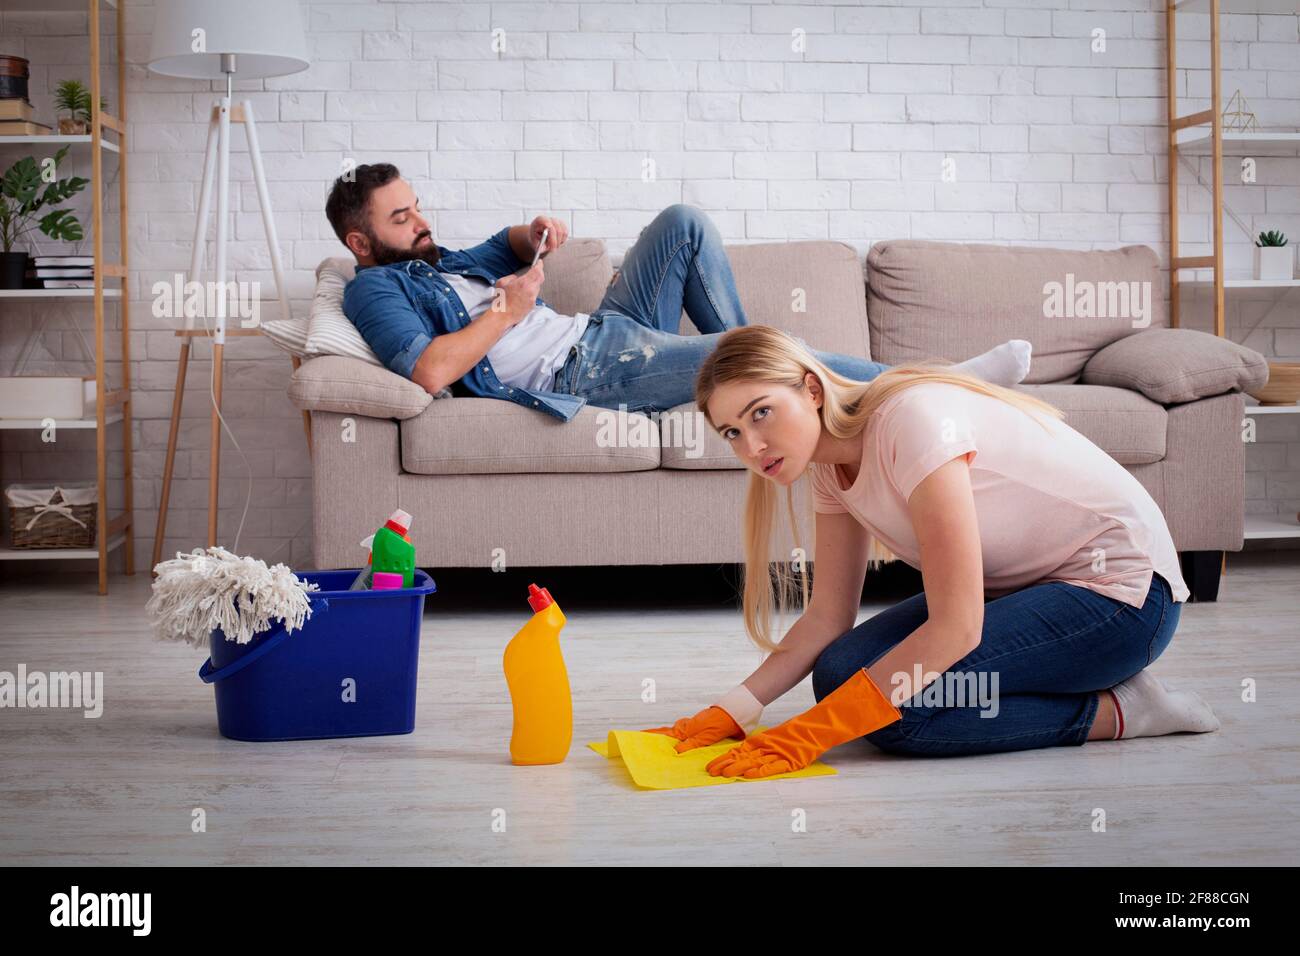 Indifference, laziness, household chores and chauvinism. Sad wife housewife washed floors Stock Photo